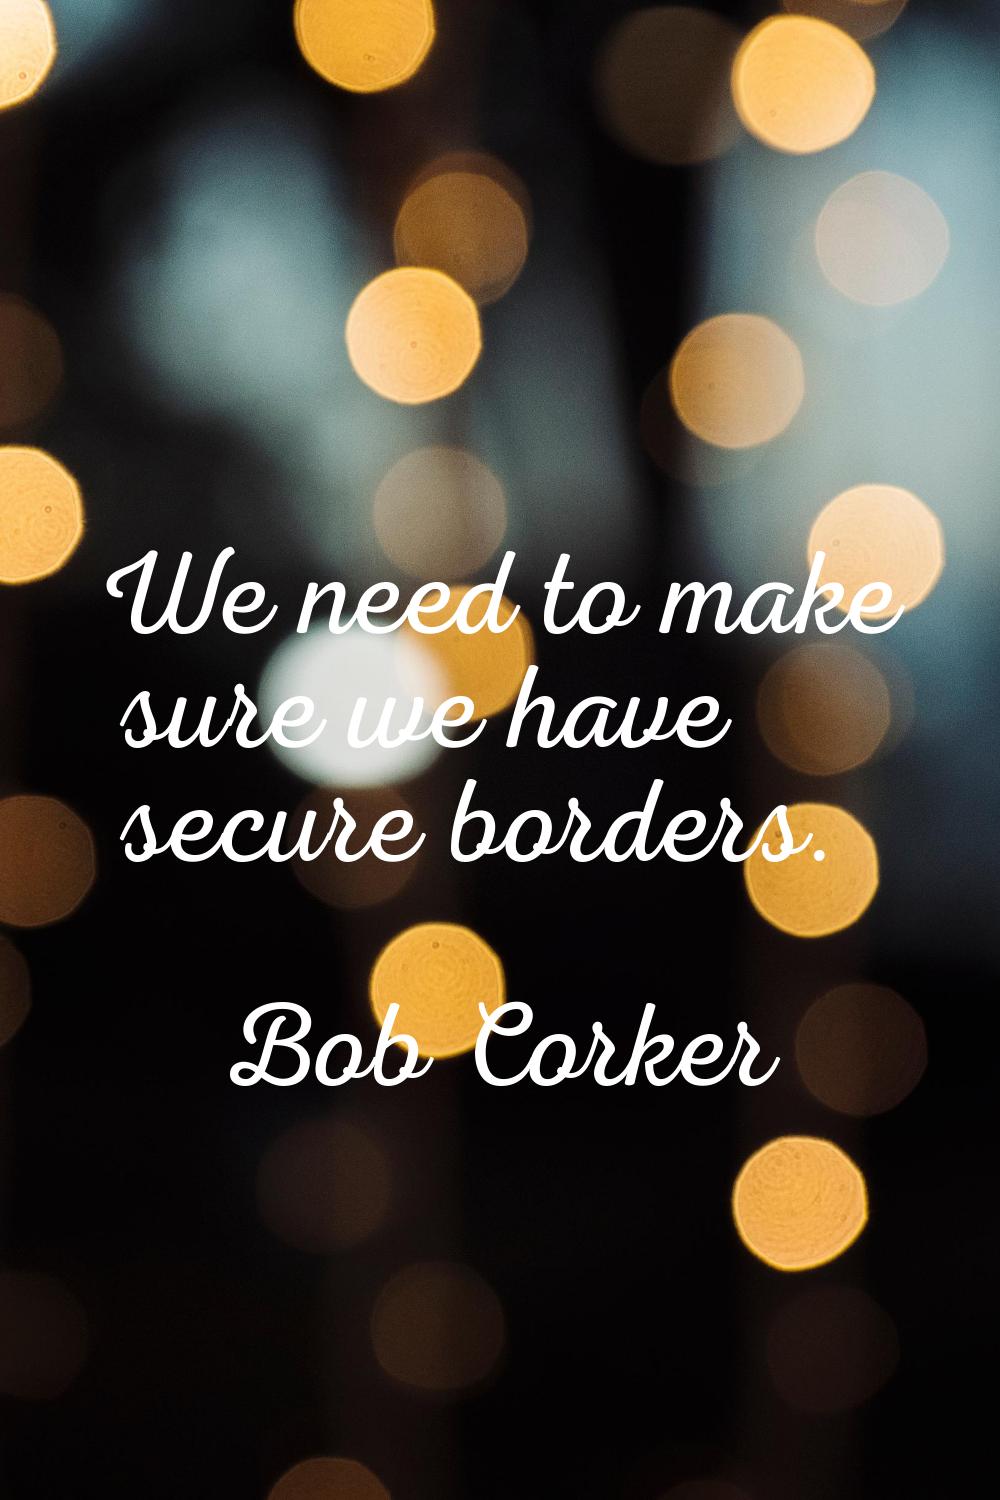 We need to make sure we have secure borders.